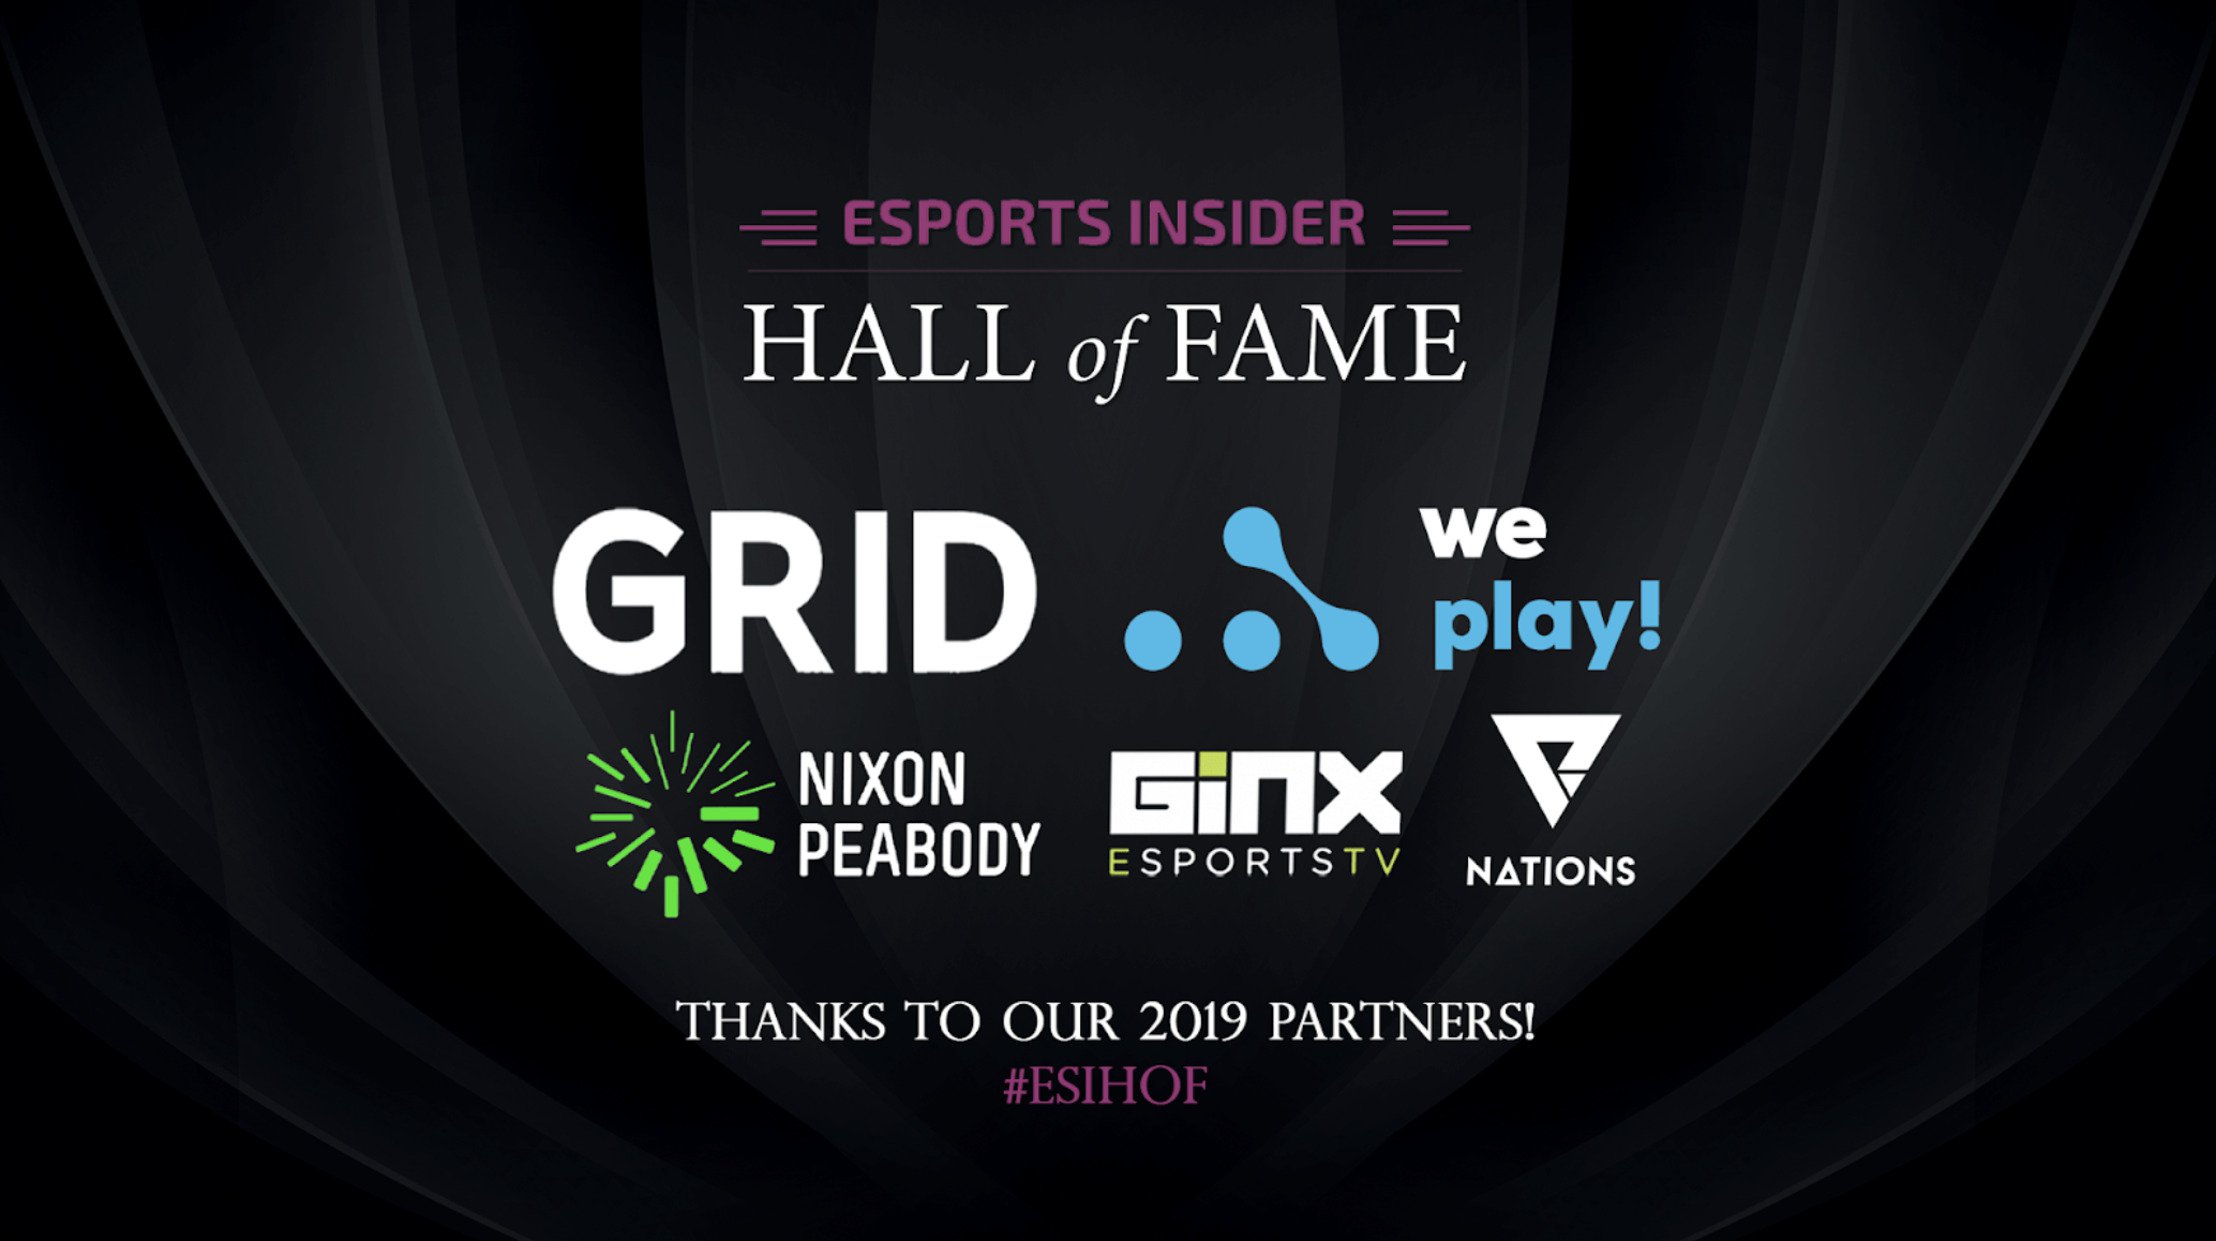 WePlay! Esports USA partners up with Esports Insider within Hall of Fame 2019